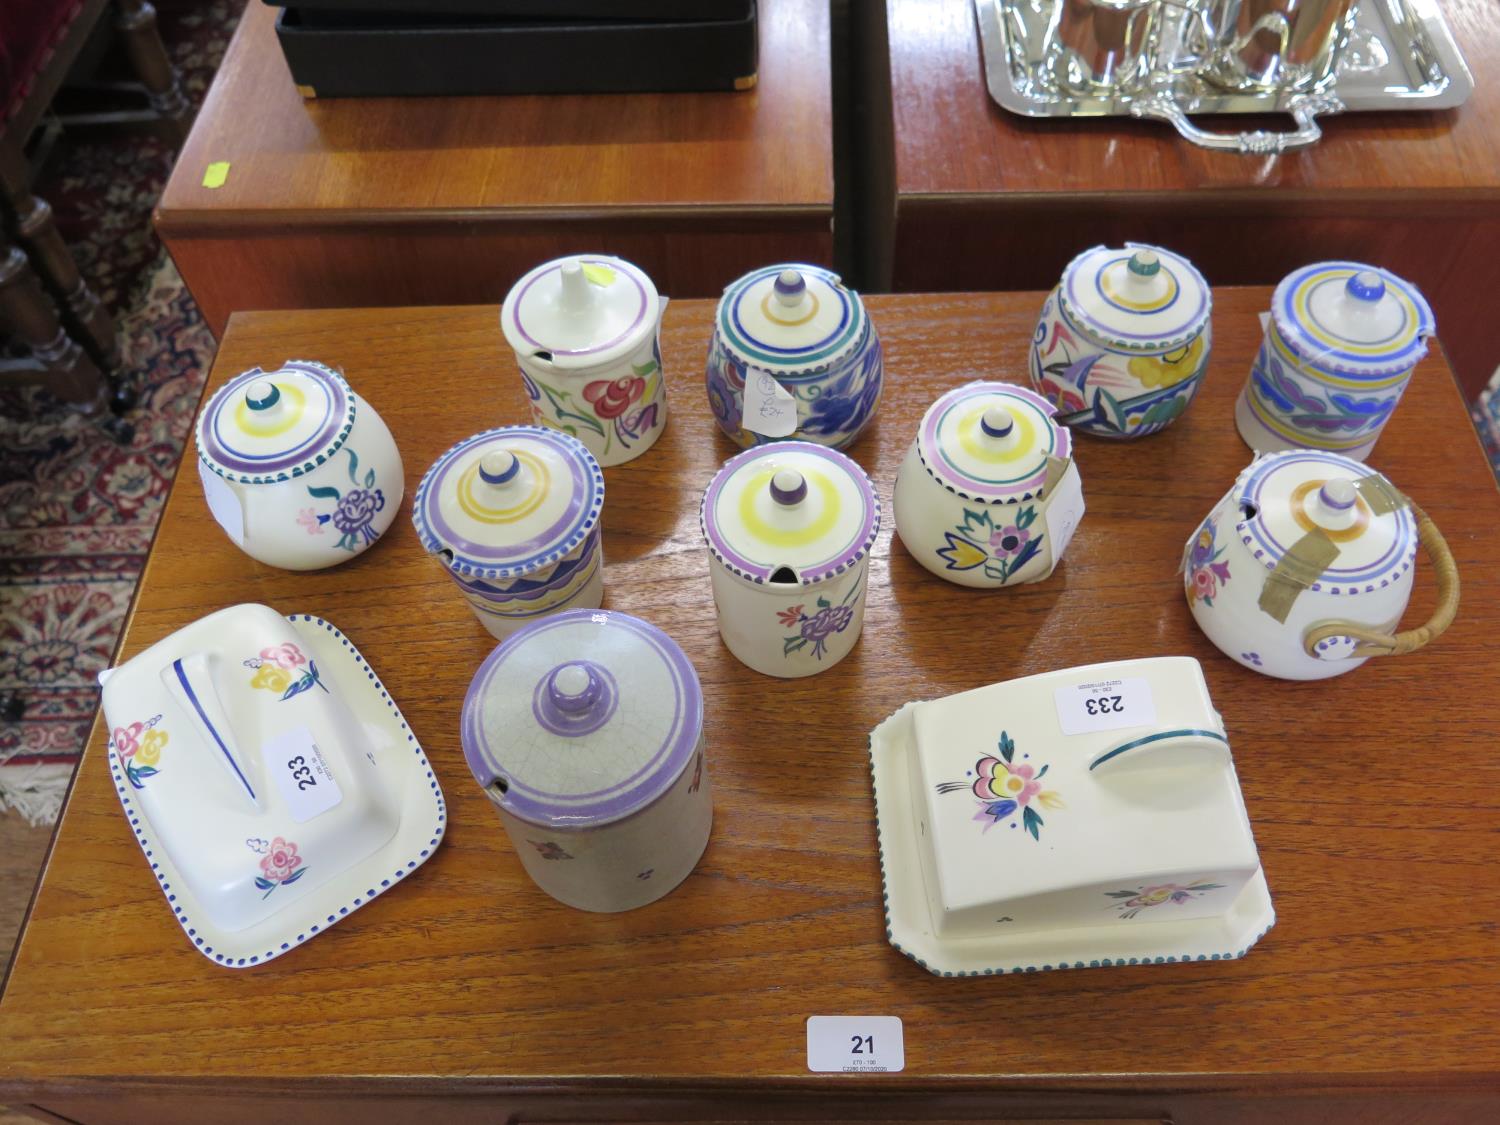 Ten Poole Pottery lidded jam pots and two cheese covers, all with floral designs